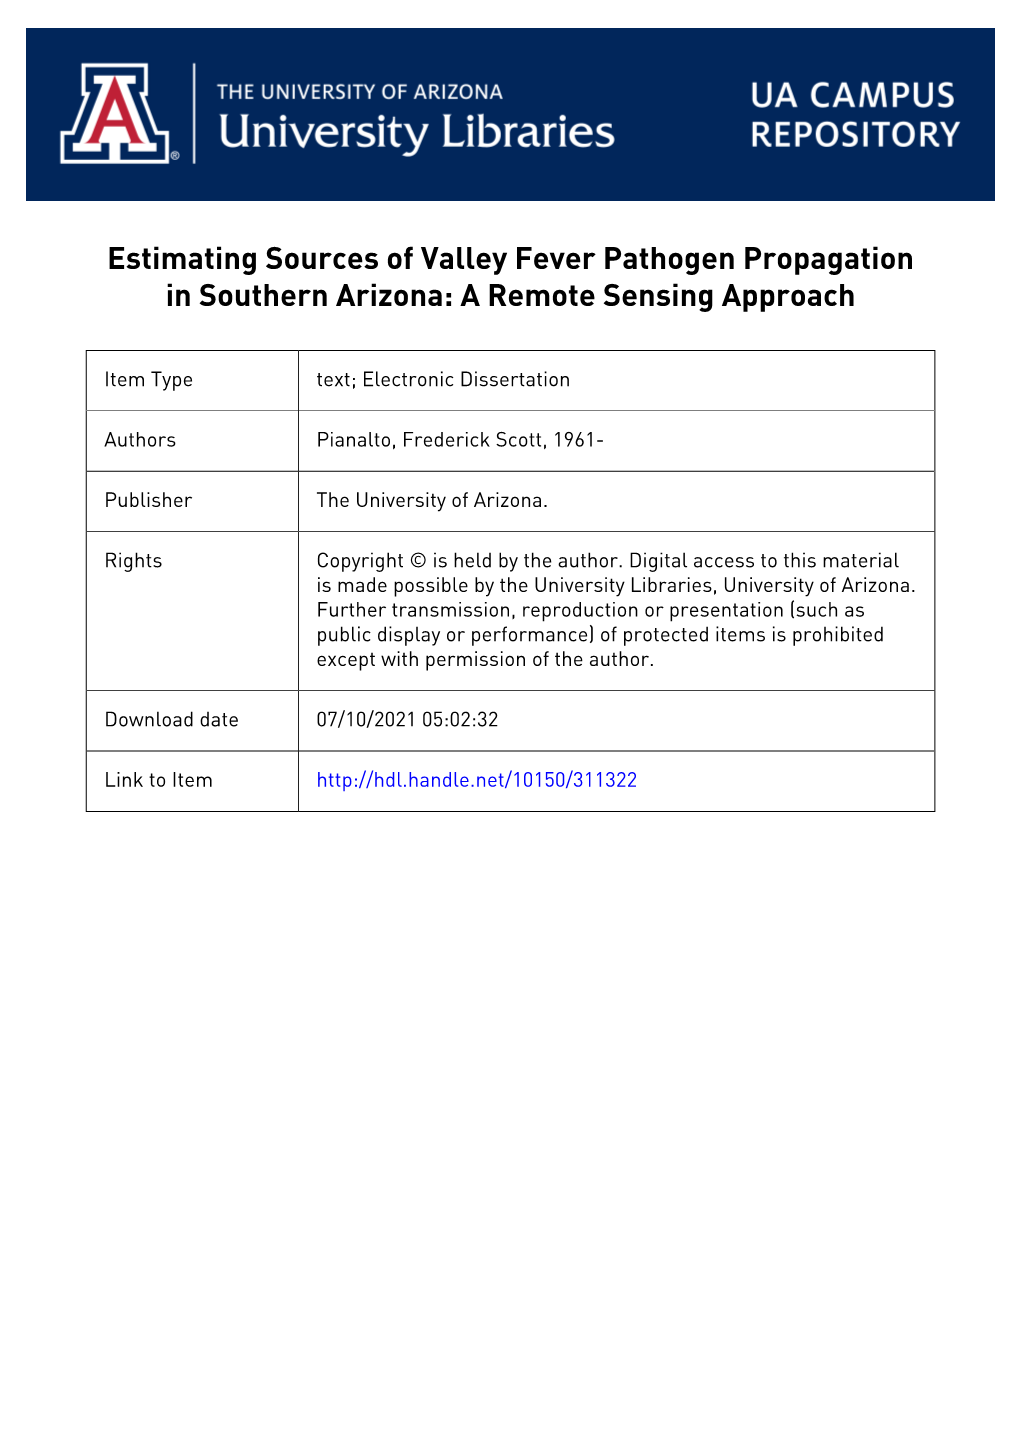 Estimating Sources of Valley Fever Pathogen Propagation in Southern Arizona: a Remote Sensing Approach